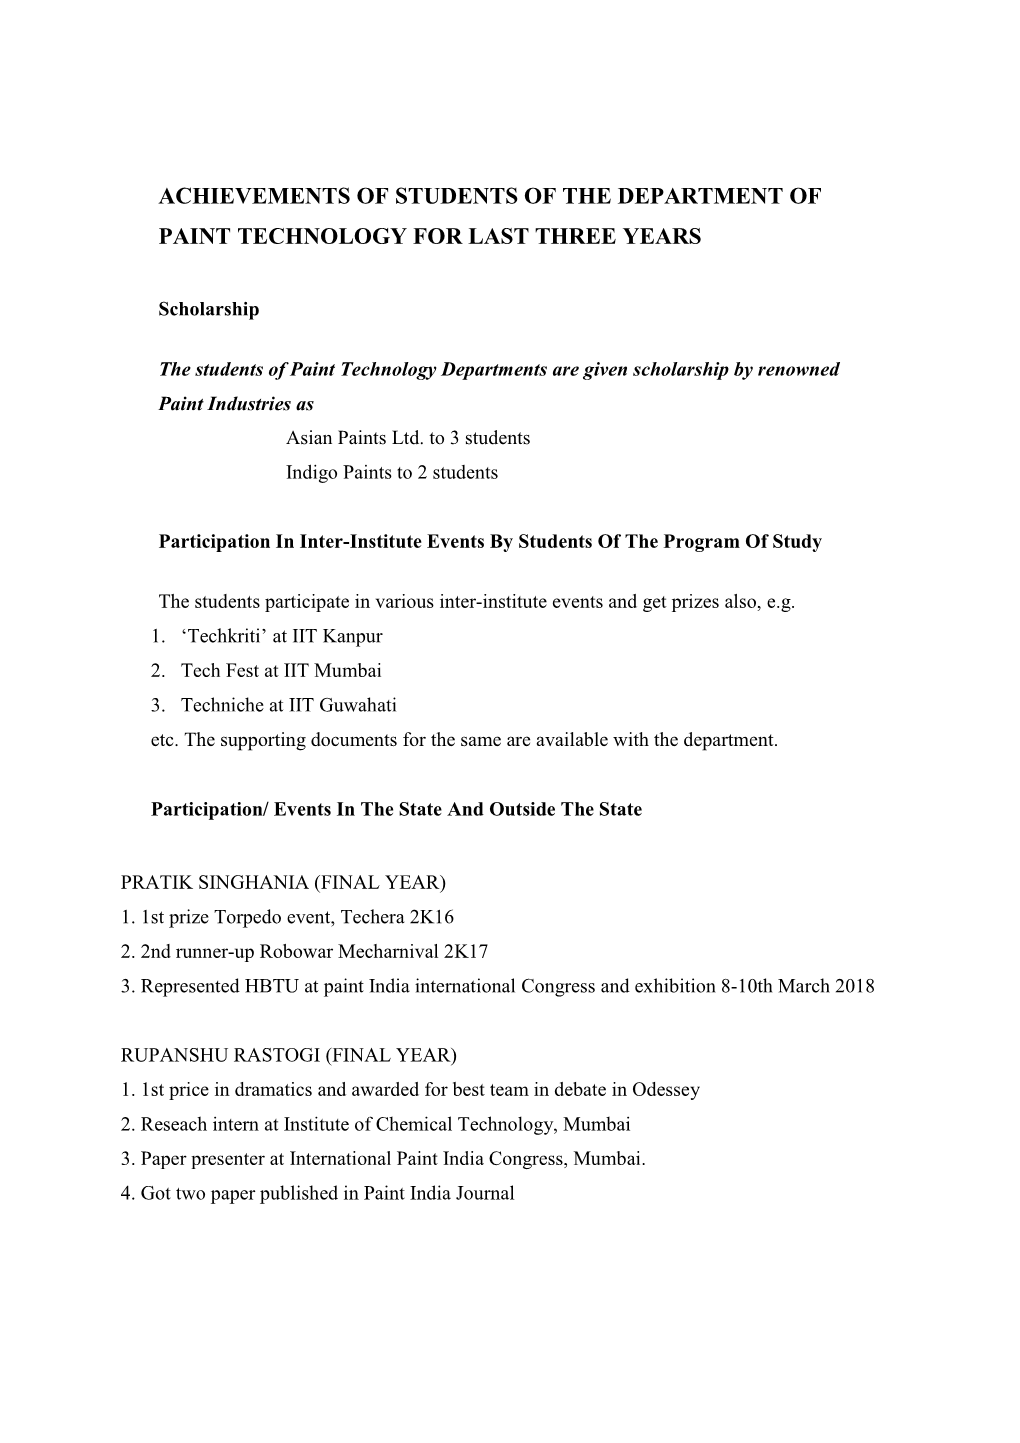 Achievements of Students of the Department of Paint Technology for Last Three Years